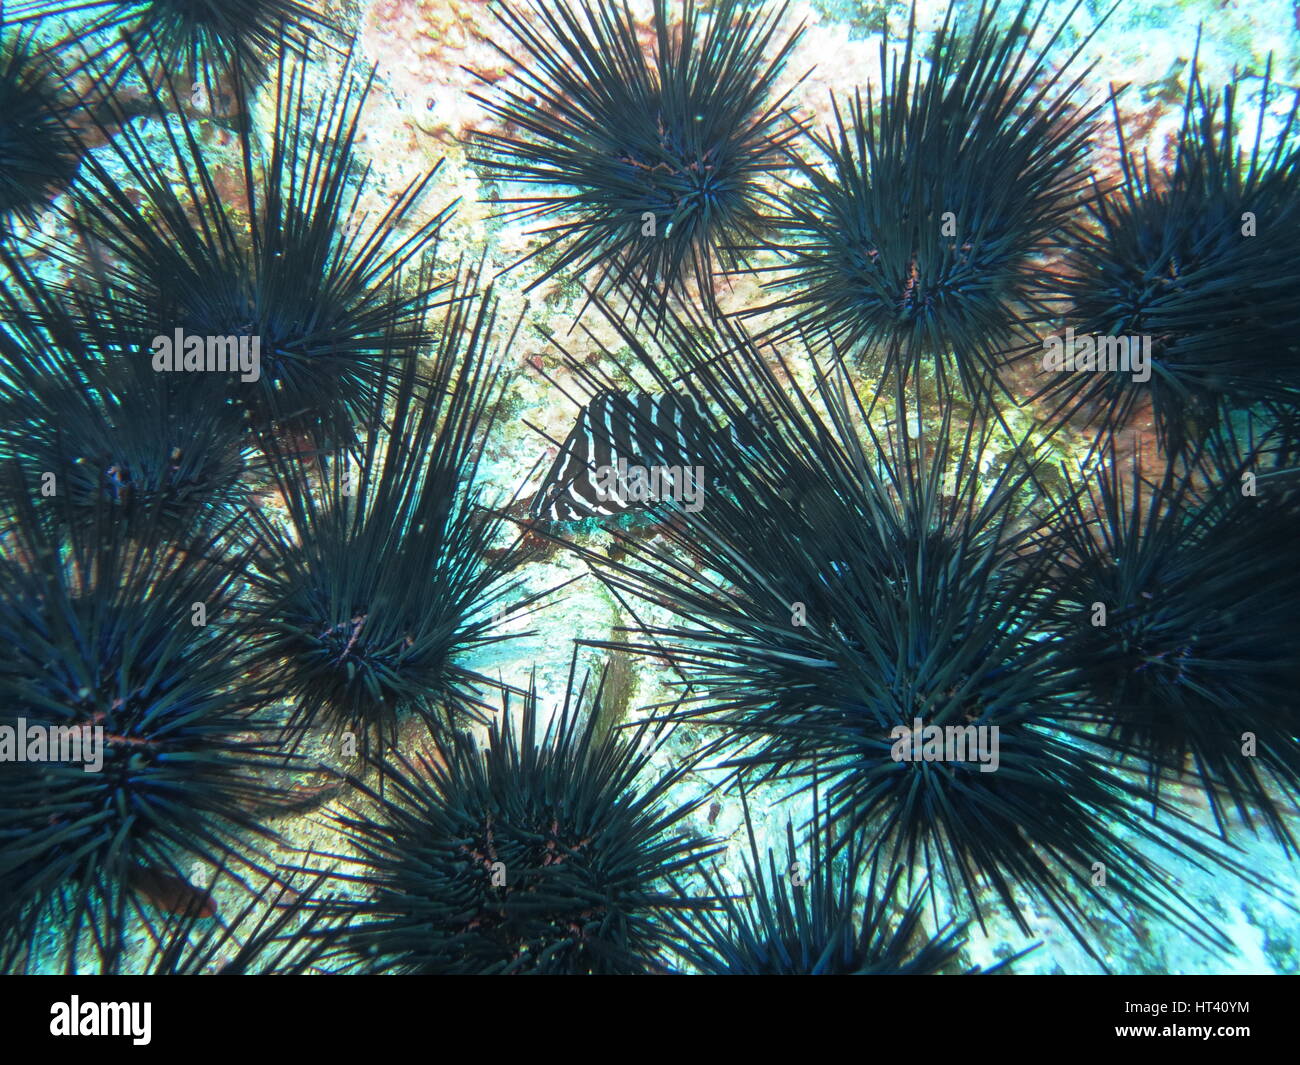 Black long spined sea urchins (diadema species) with black and white striped fish hiding between them Stock Photo